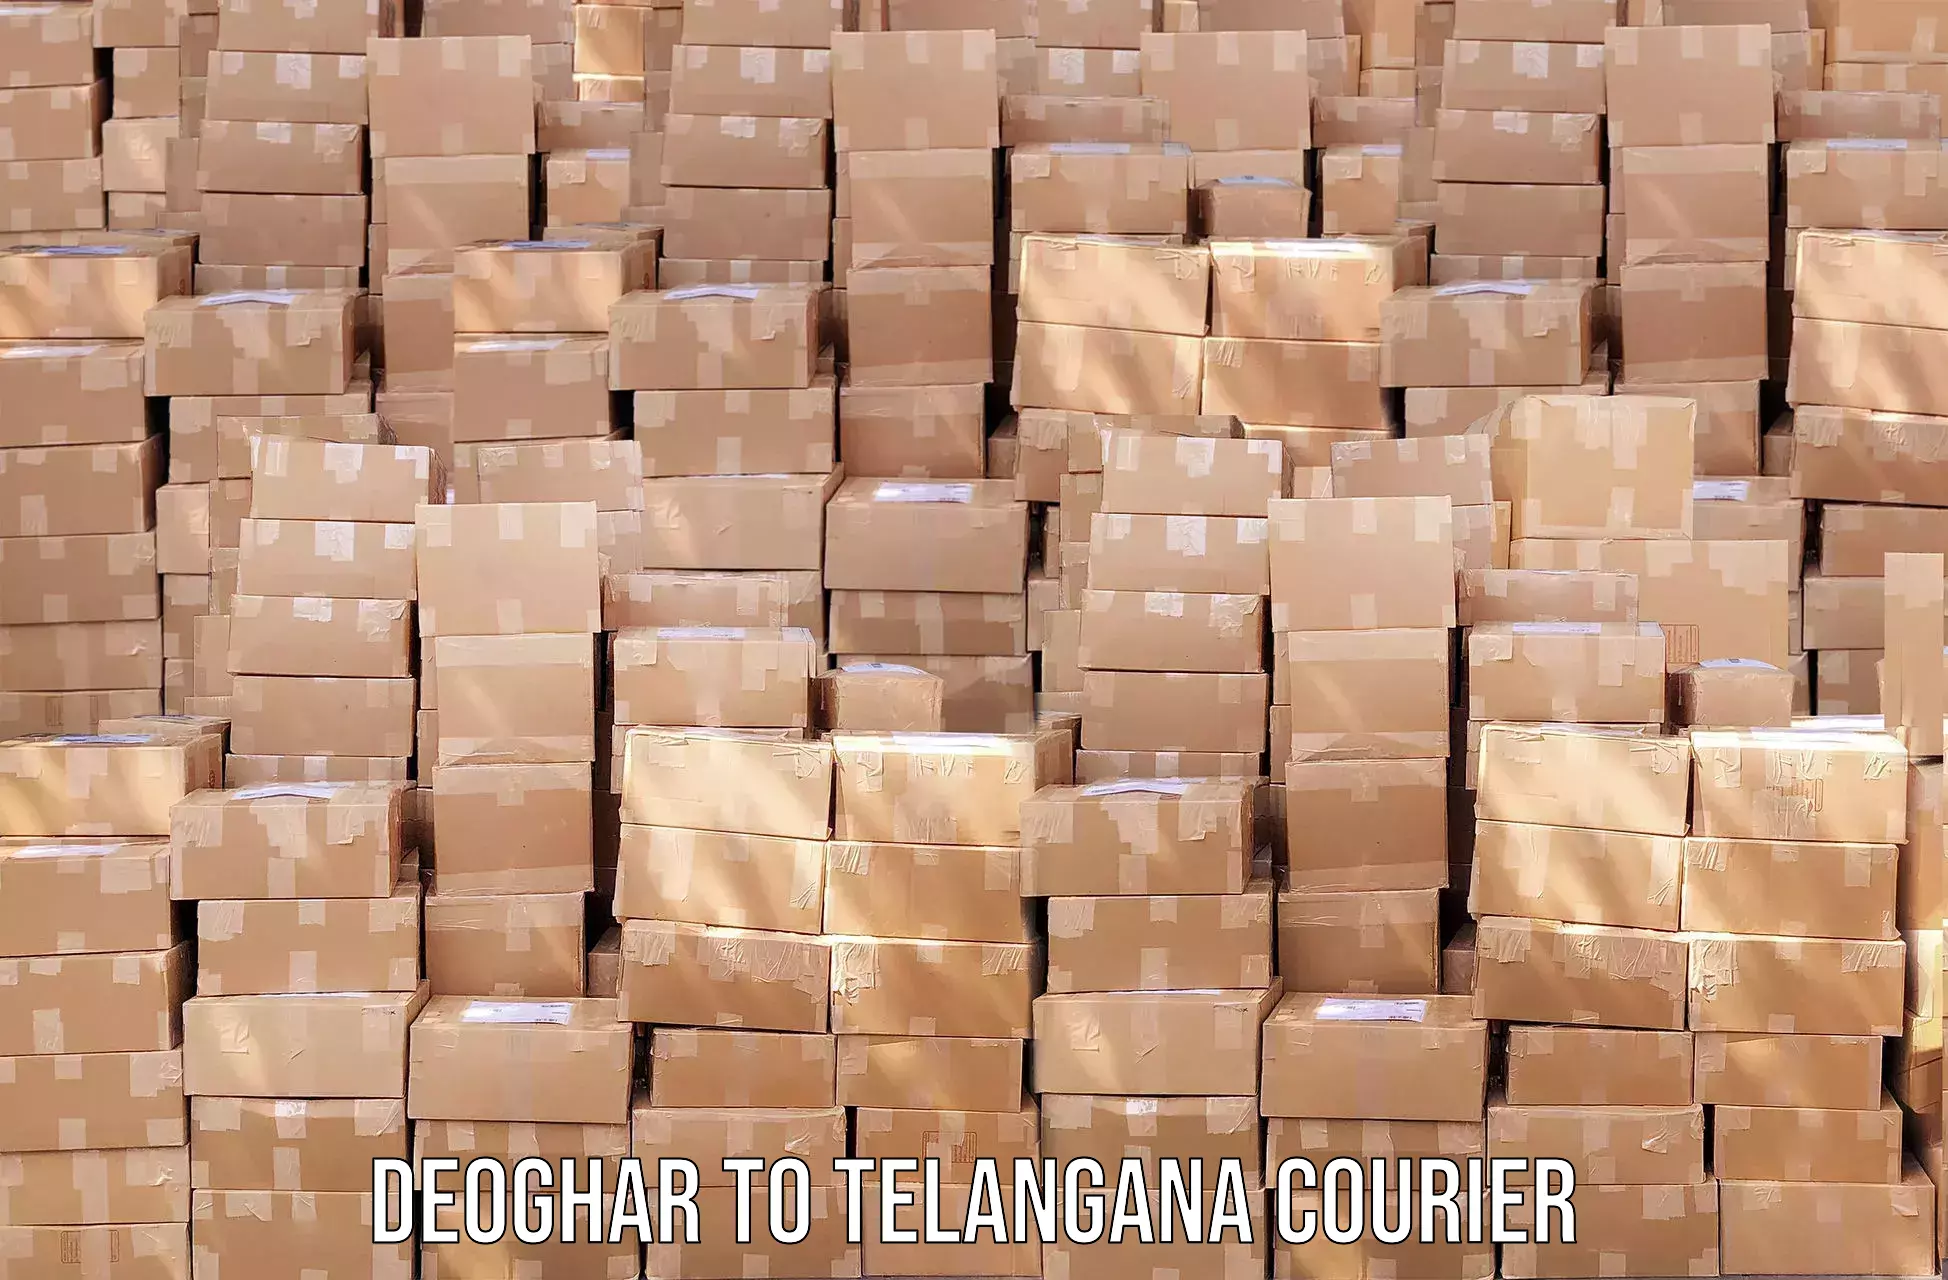 State-of-the-art courier technology Deoghar to Kamareddy